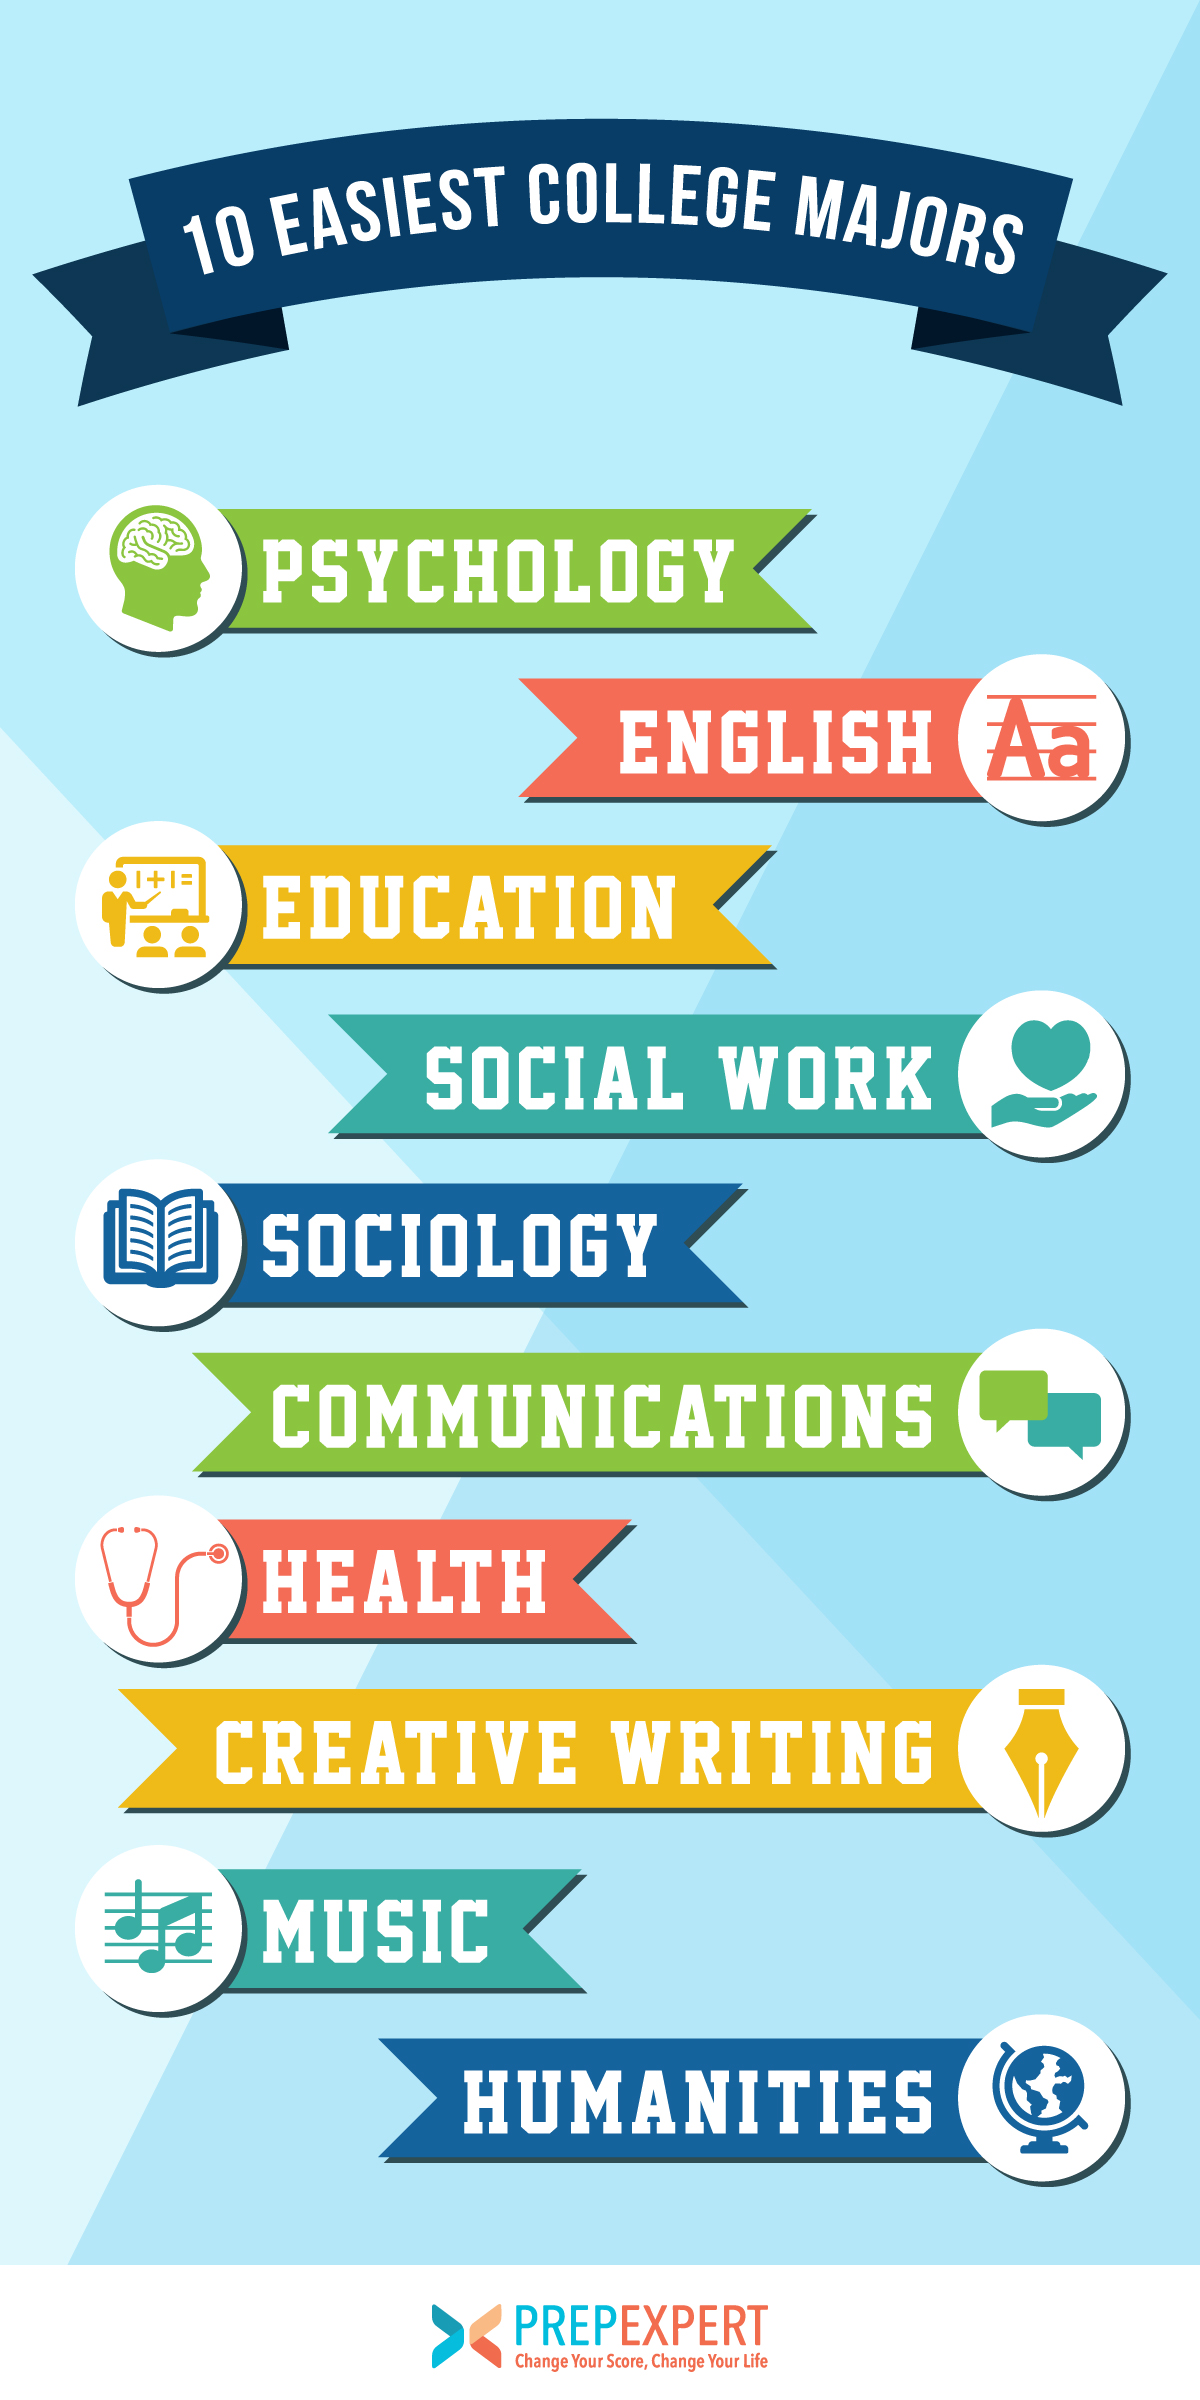 578787 10 Easiest College Majors Infographic 110719 